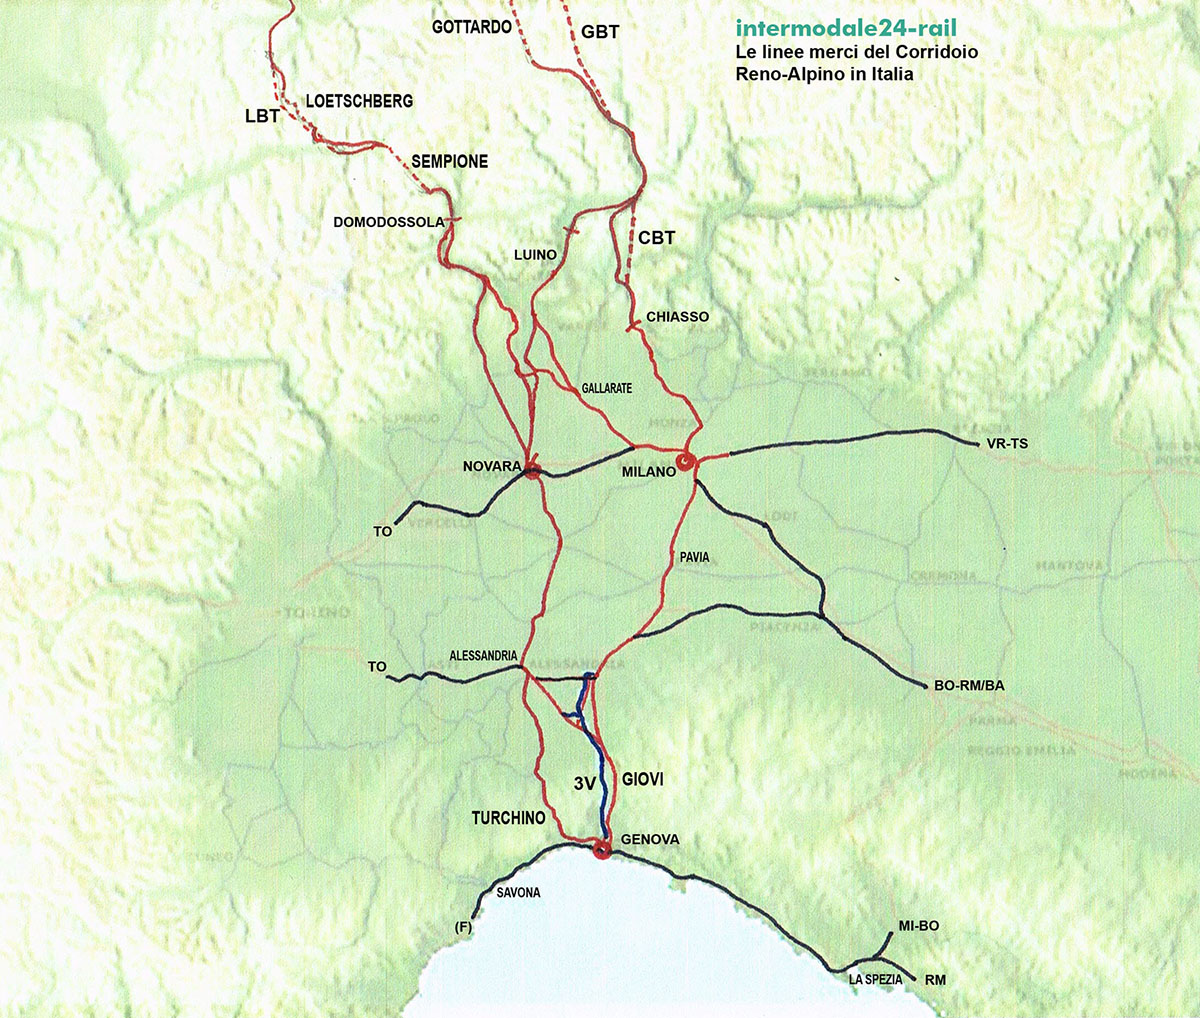 17/ But the big changes are yet to come. The opening of the Terzo Valico base tunnel in the mid 2020s will add the final stretch of a flat route for 750m long freight trains to the Po Valley and up the Gottardo & Simplon to central and northern Europe